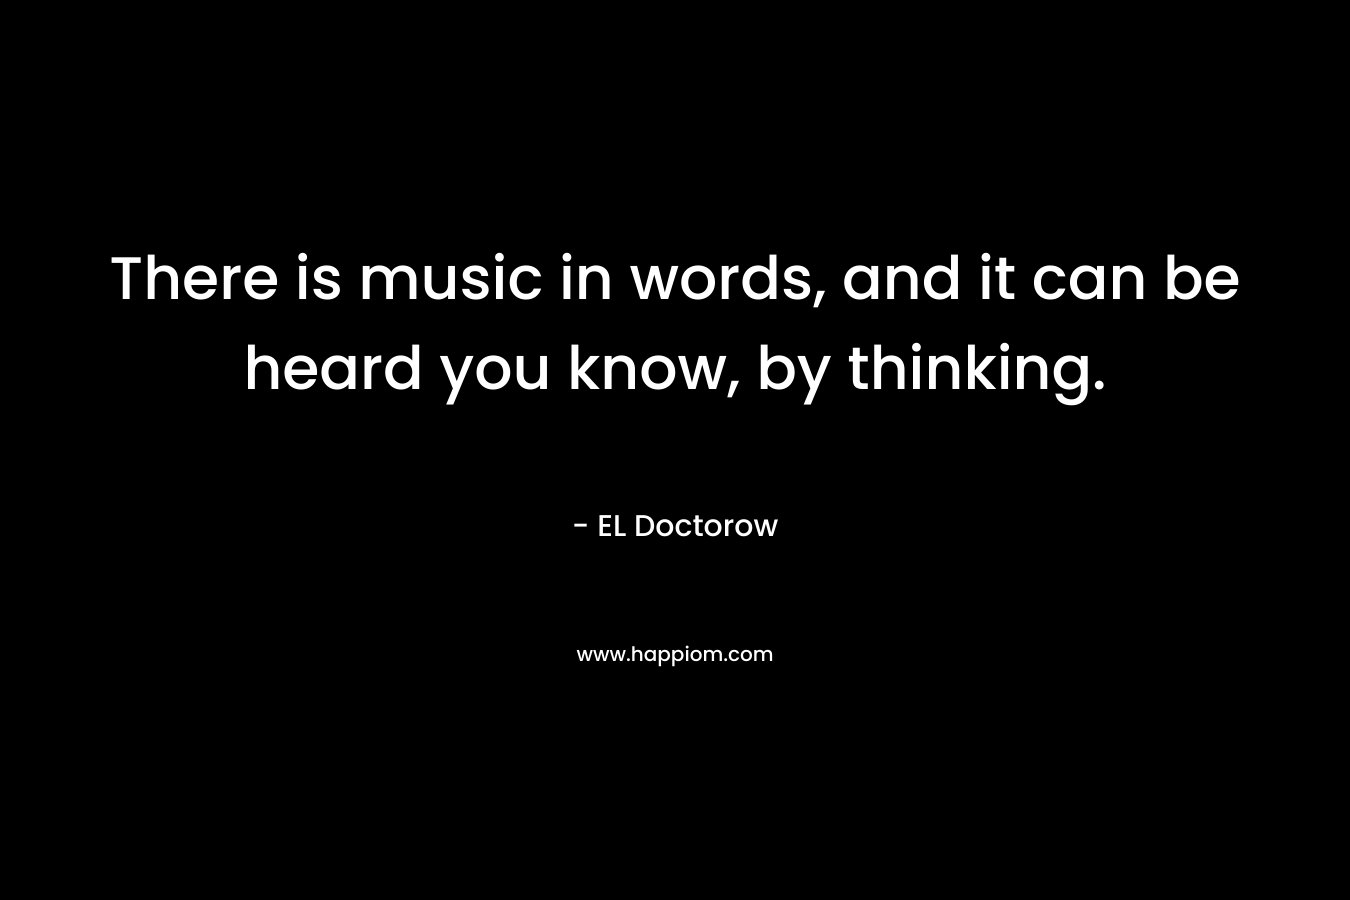 There is music in words, and it can be heard you know, by thinking.